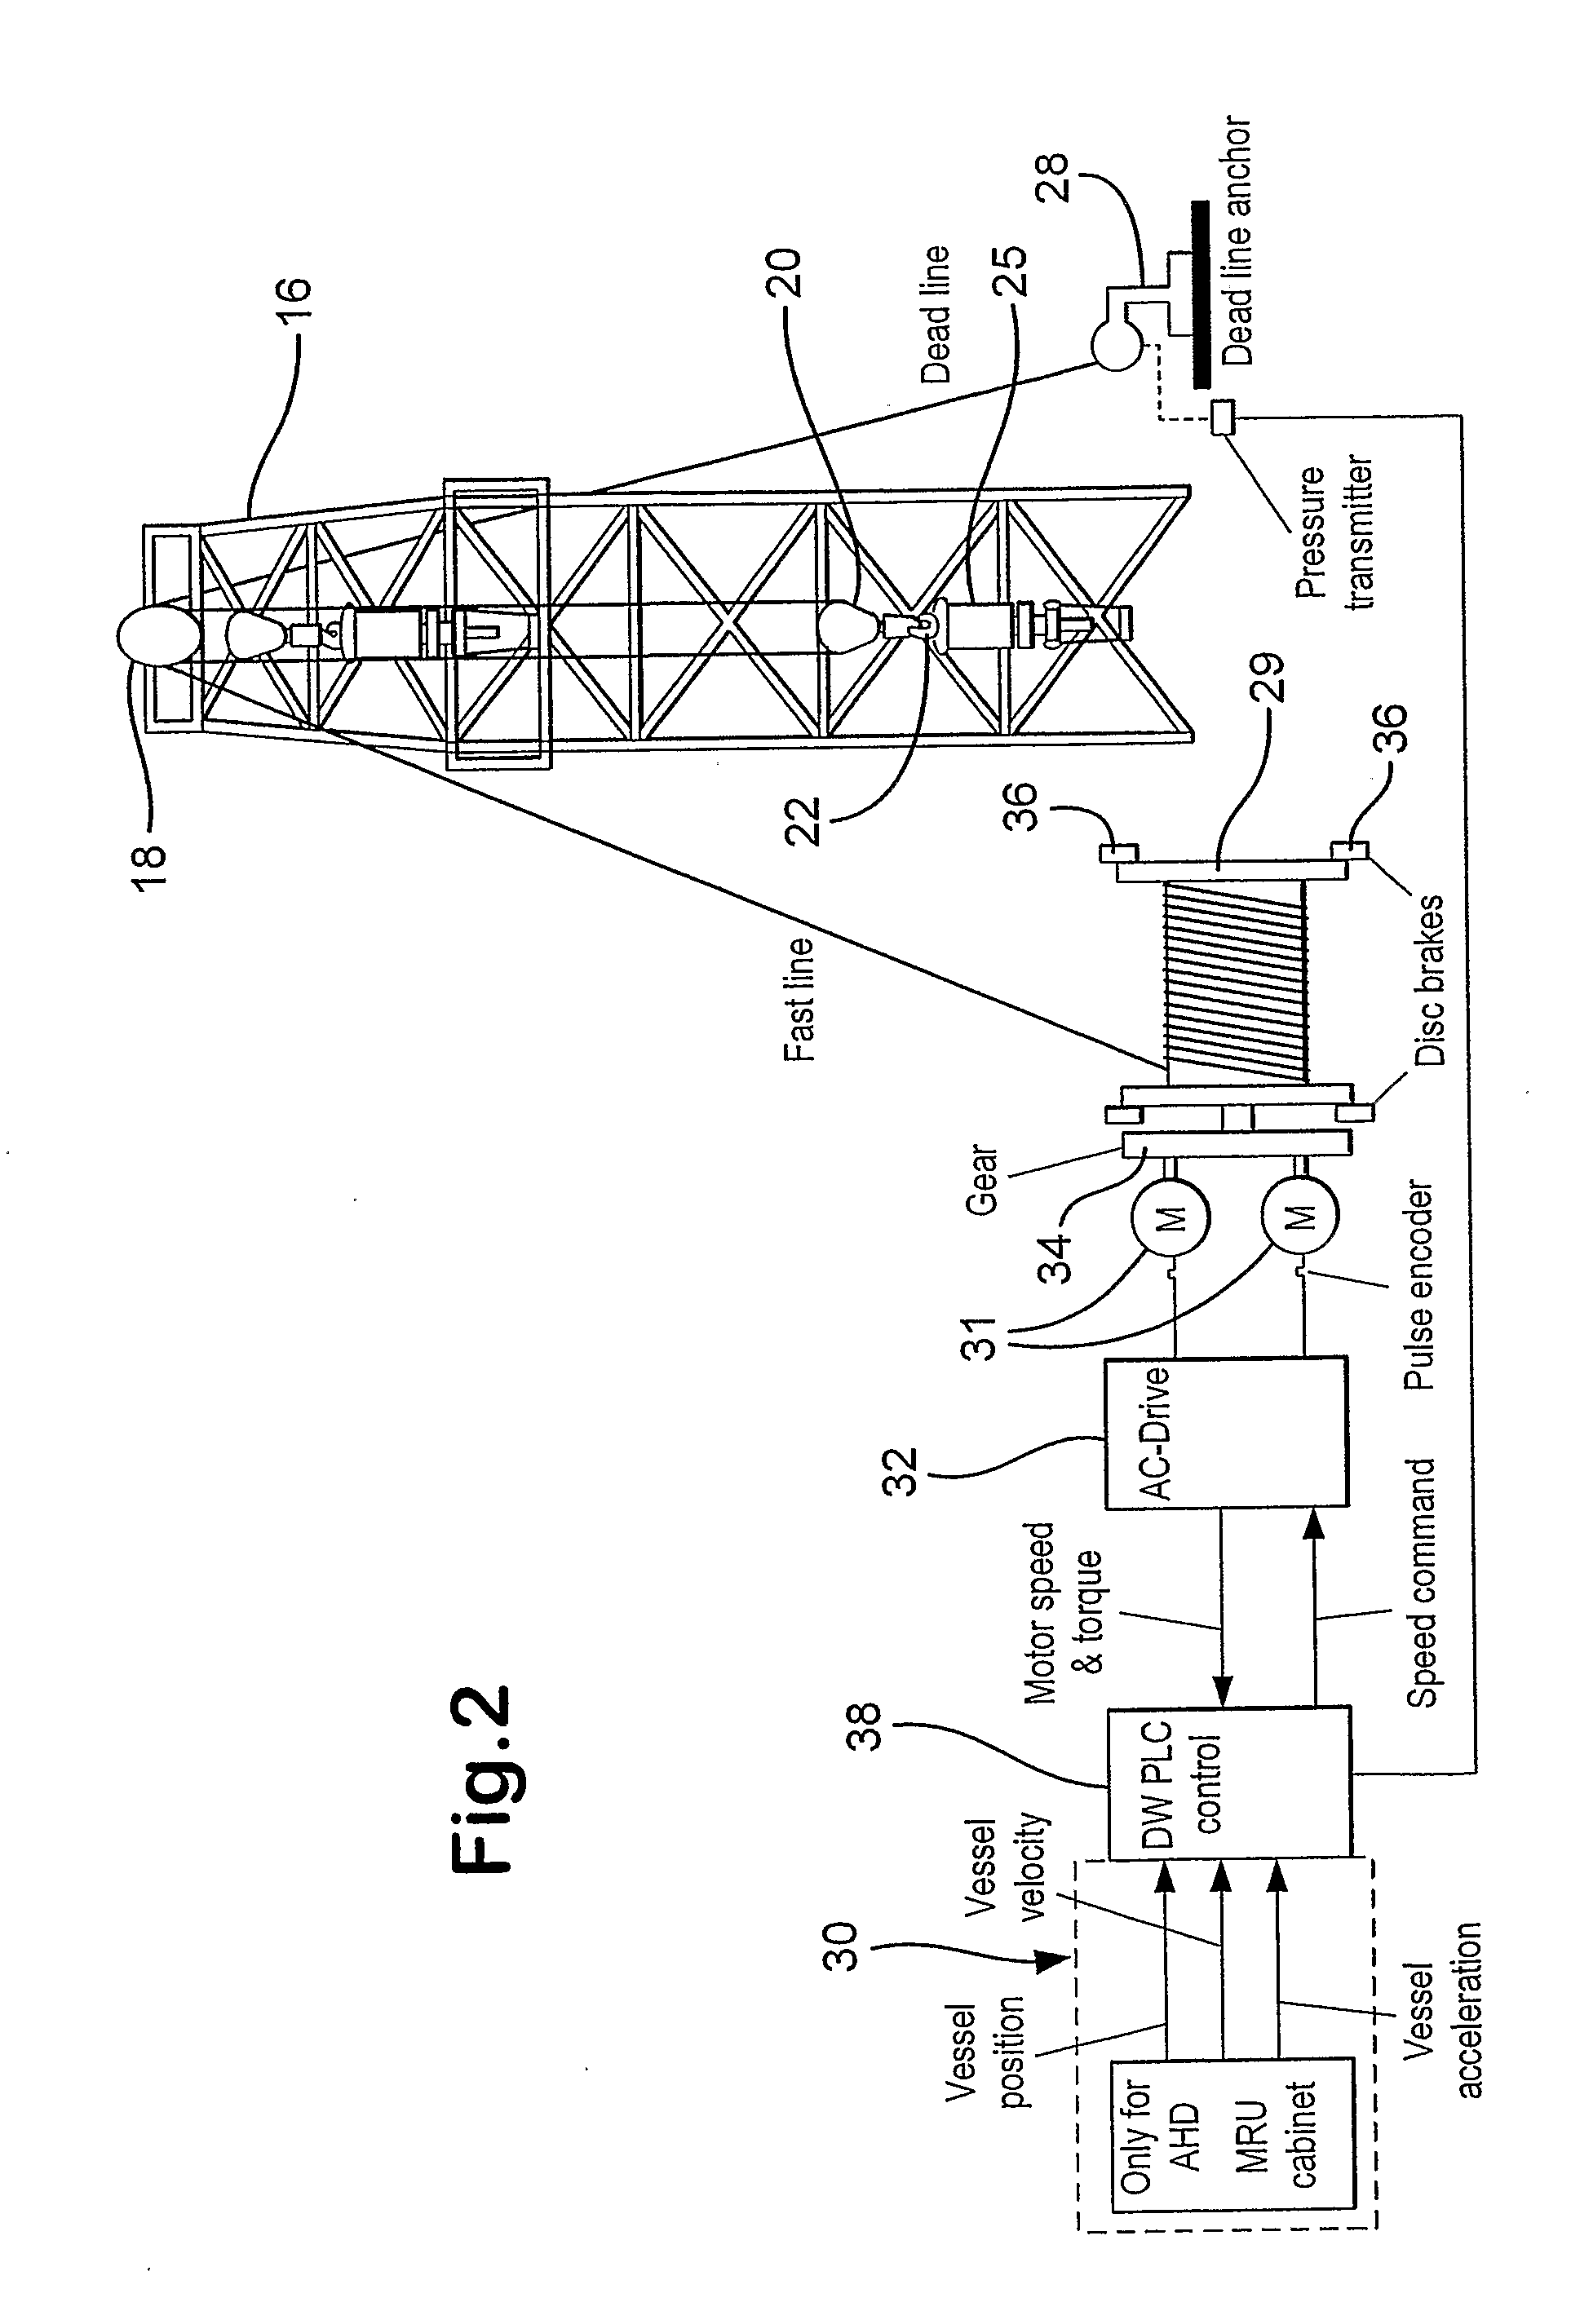 Method and Apparatus for Active Heave Compensation